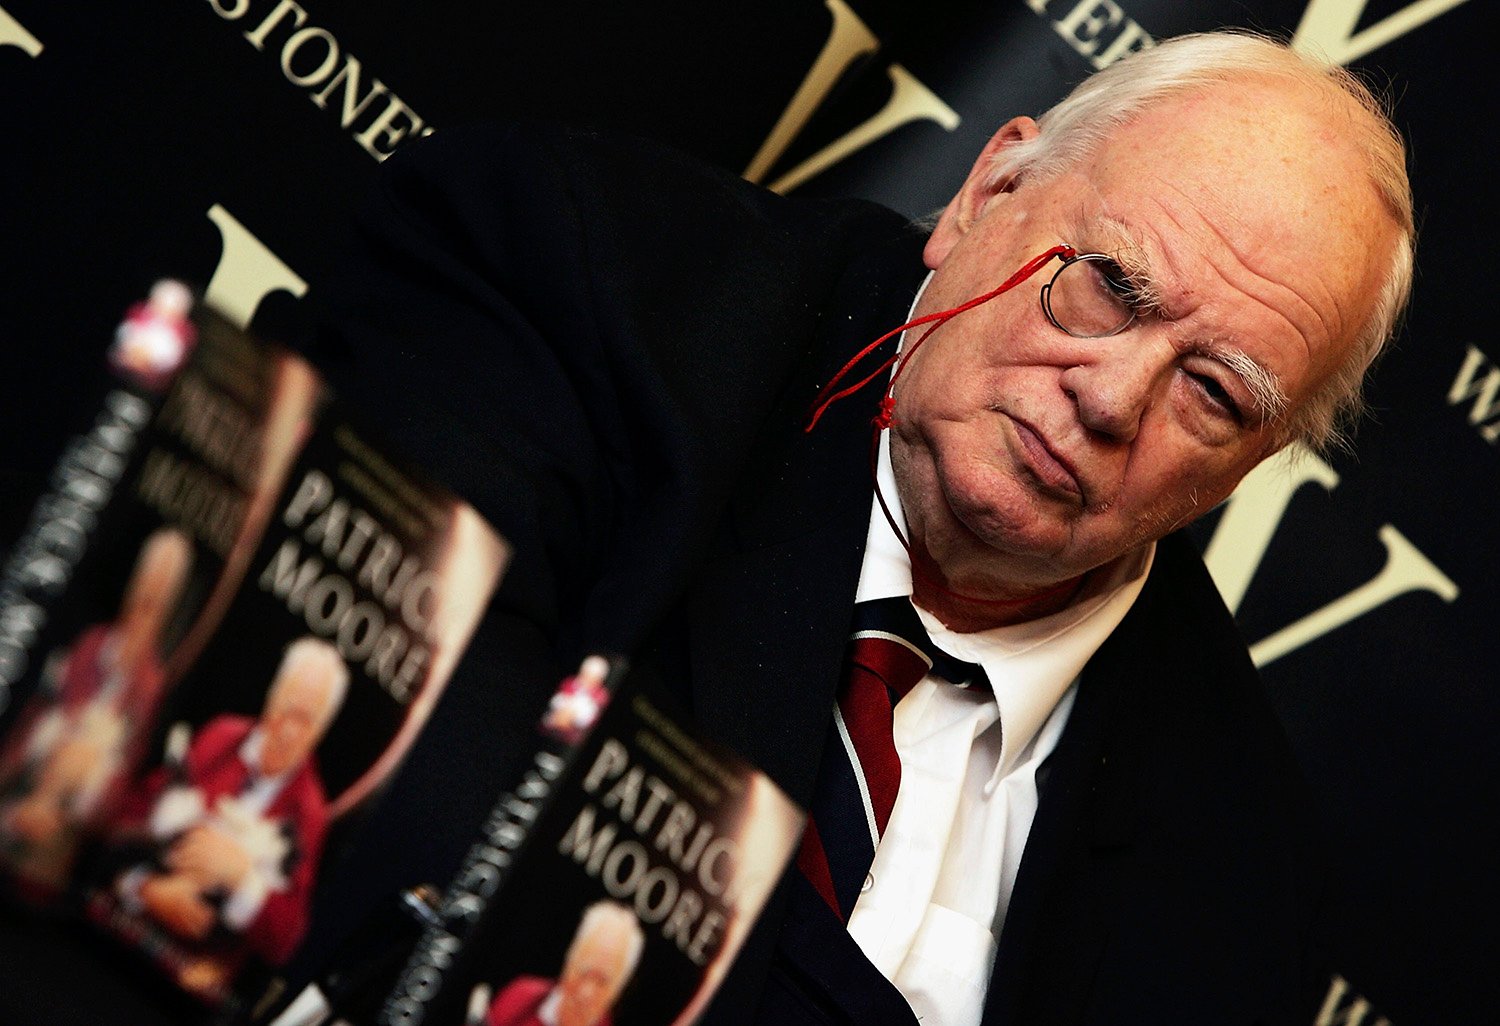 Astronomer and GamesMaster star Sir Patrick Moore at a book signing in 2005